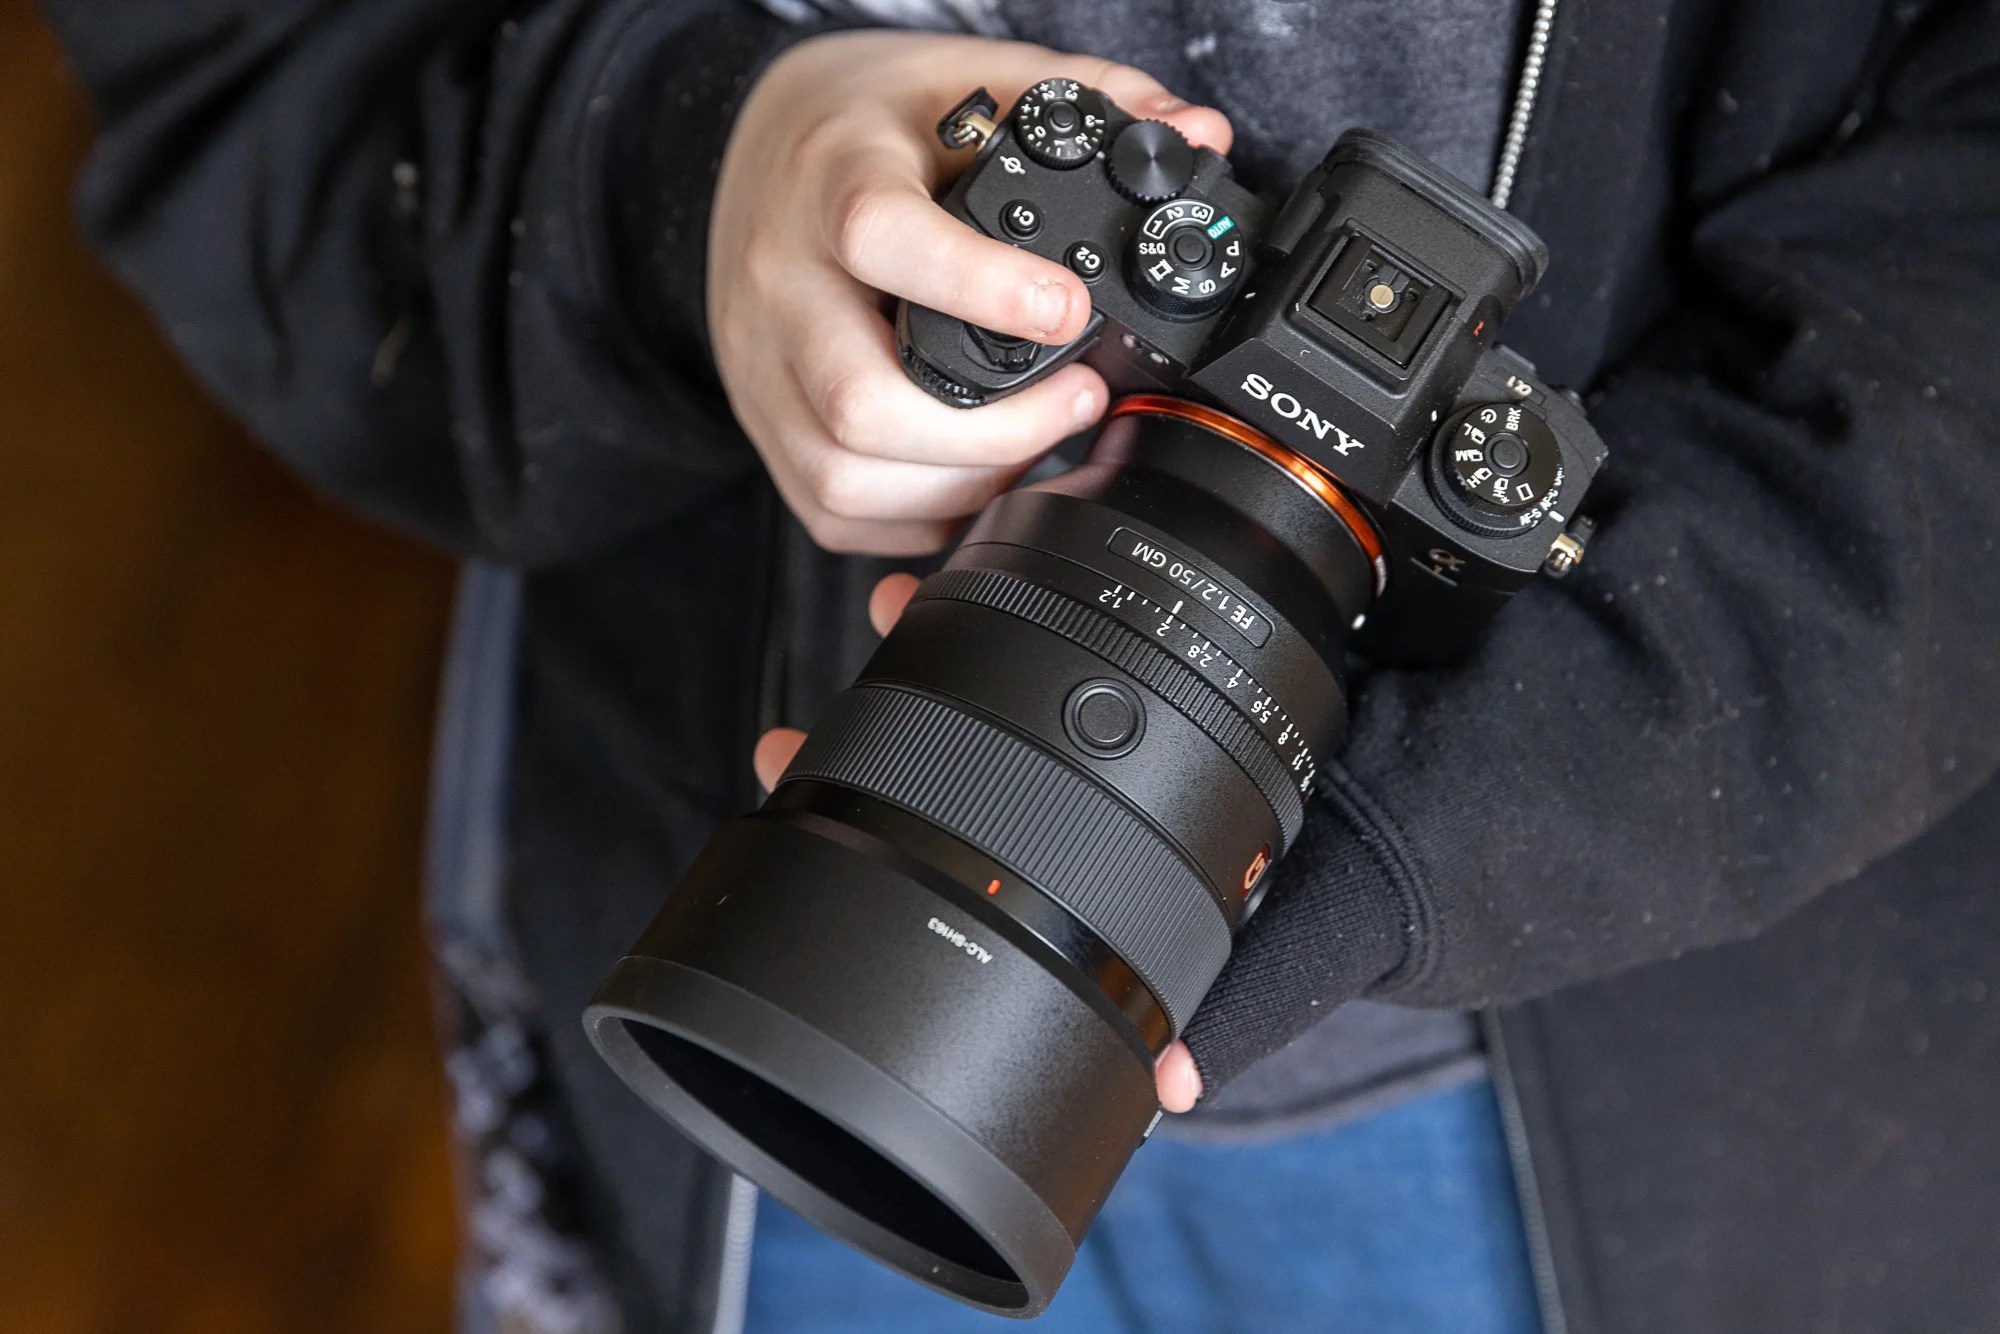 A hand holds the Sony a1 mirrorless camera in front of their body.